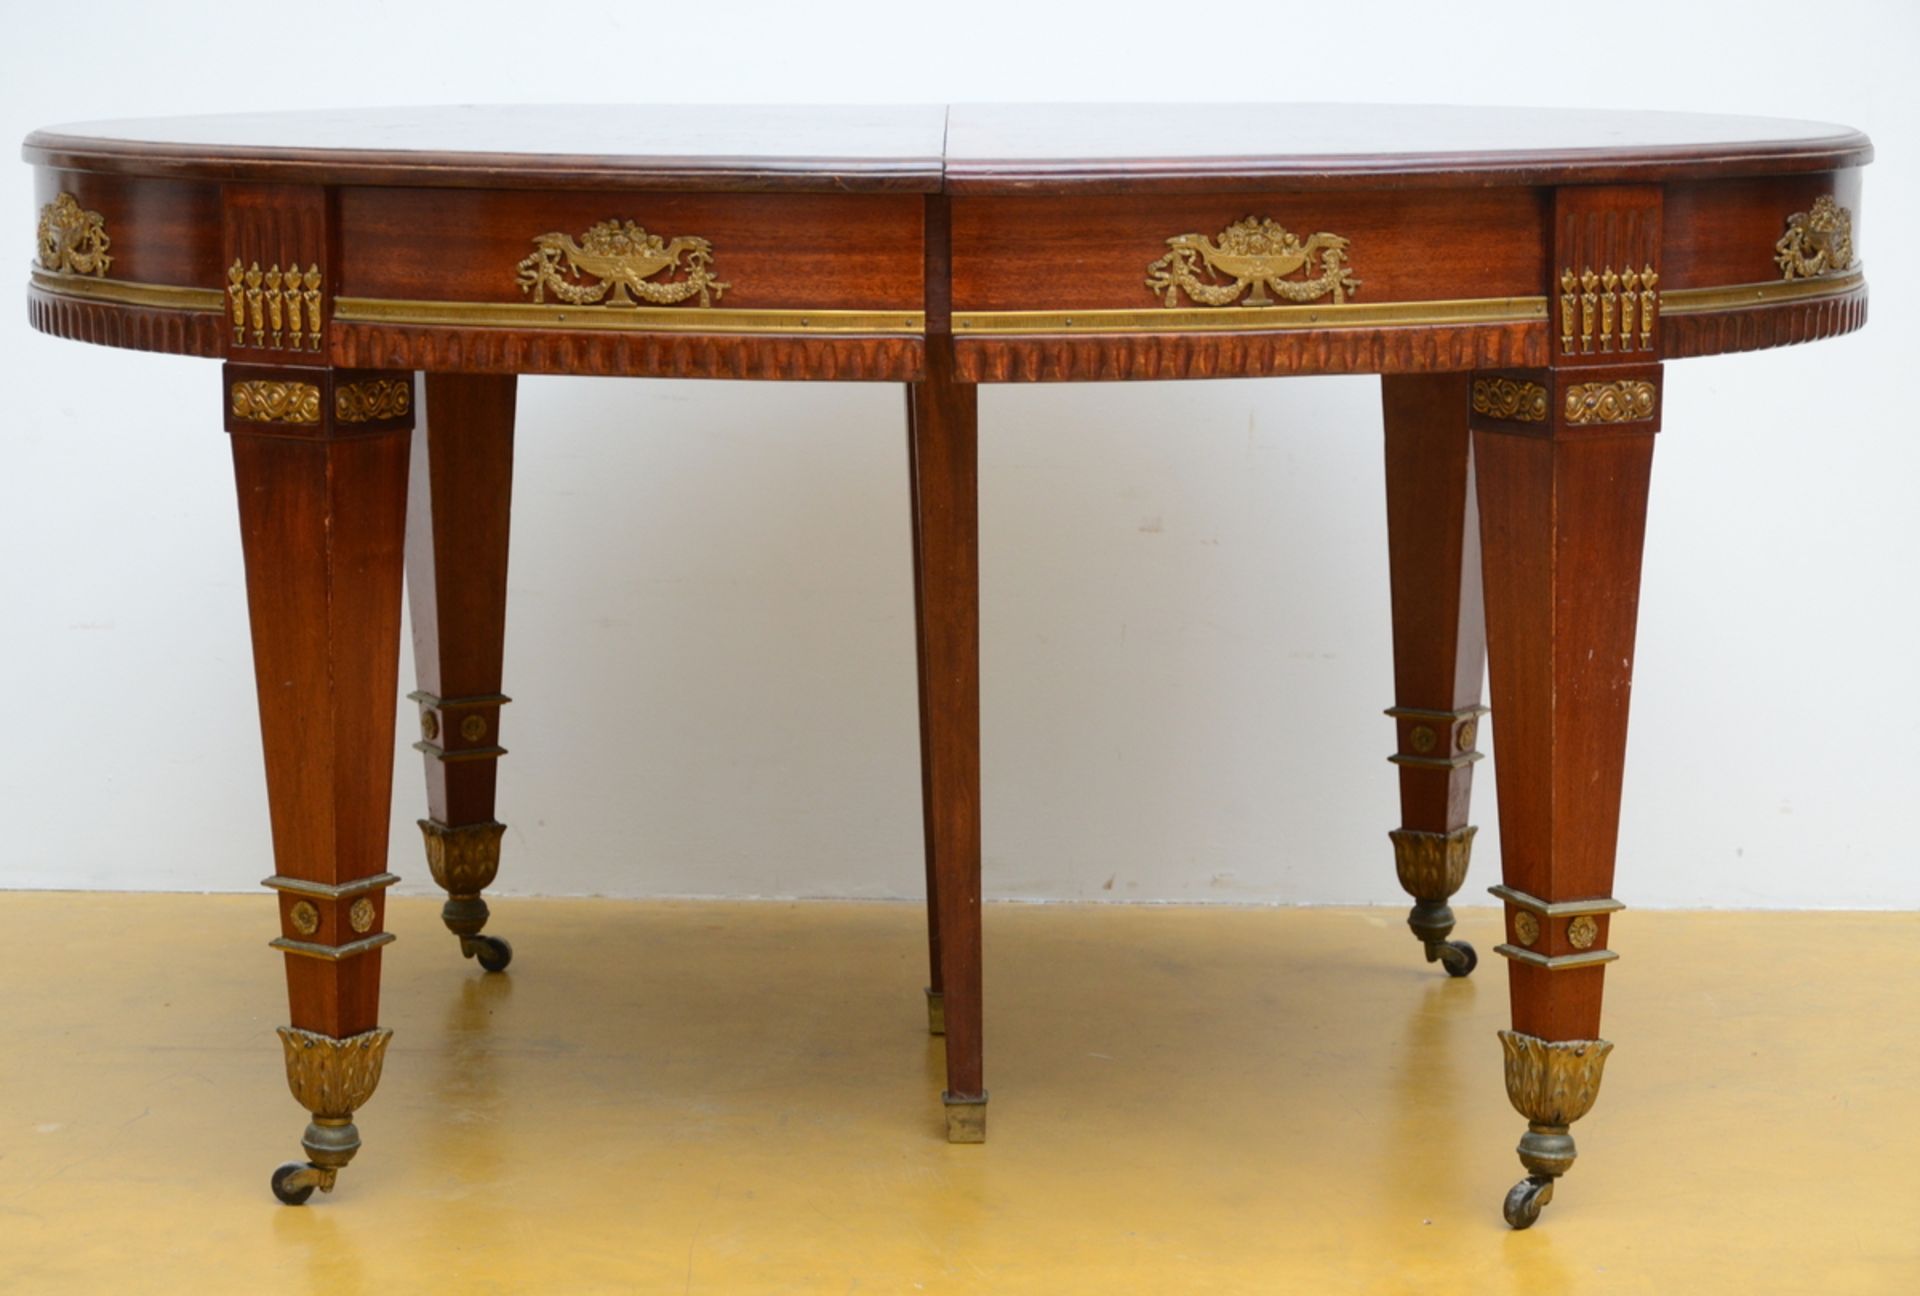 Empire style mahogany table with gilt bronze fittings (78x140x104 cm)